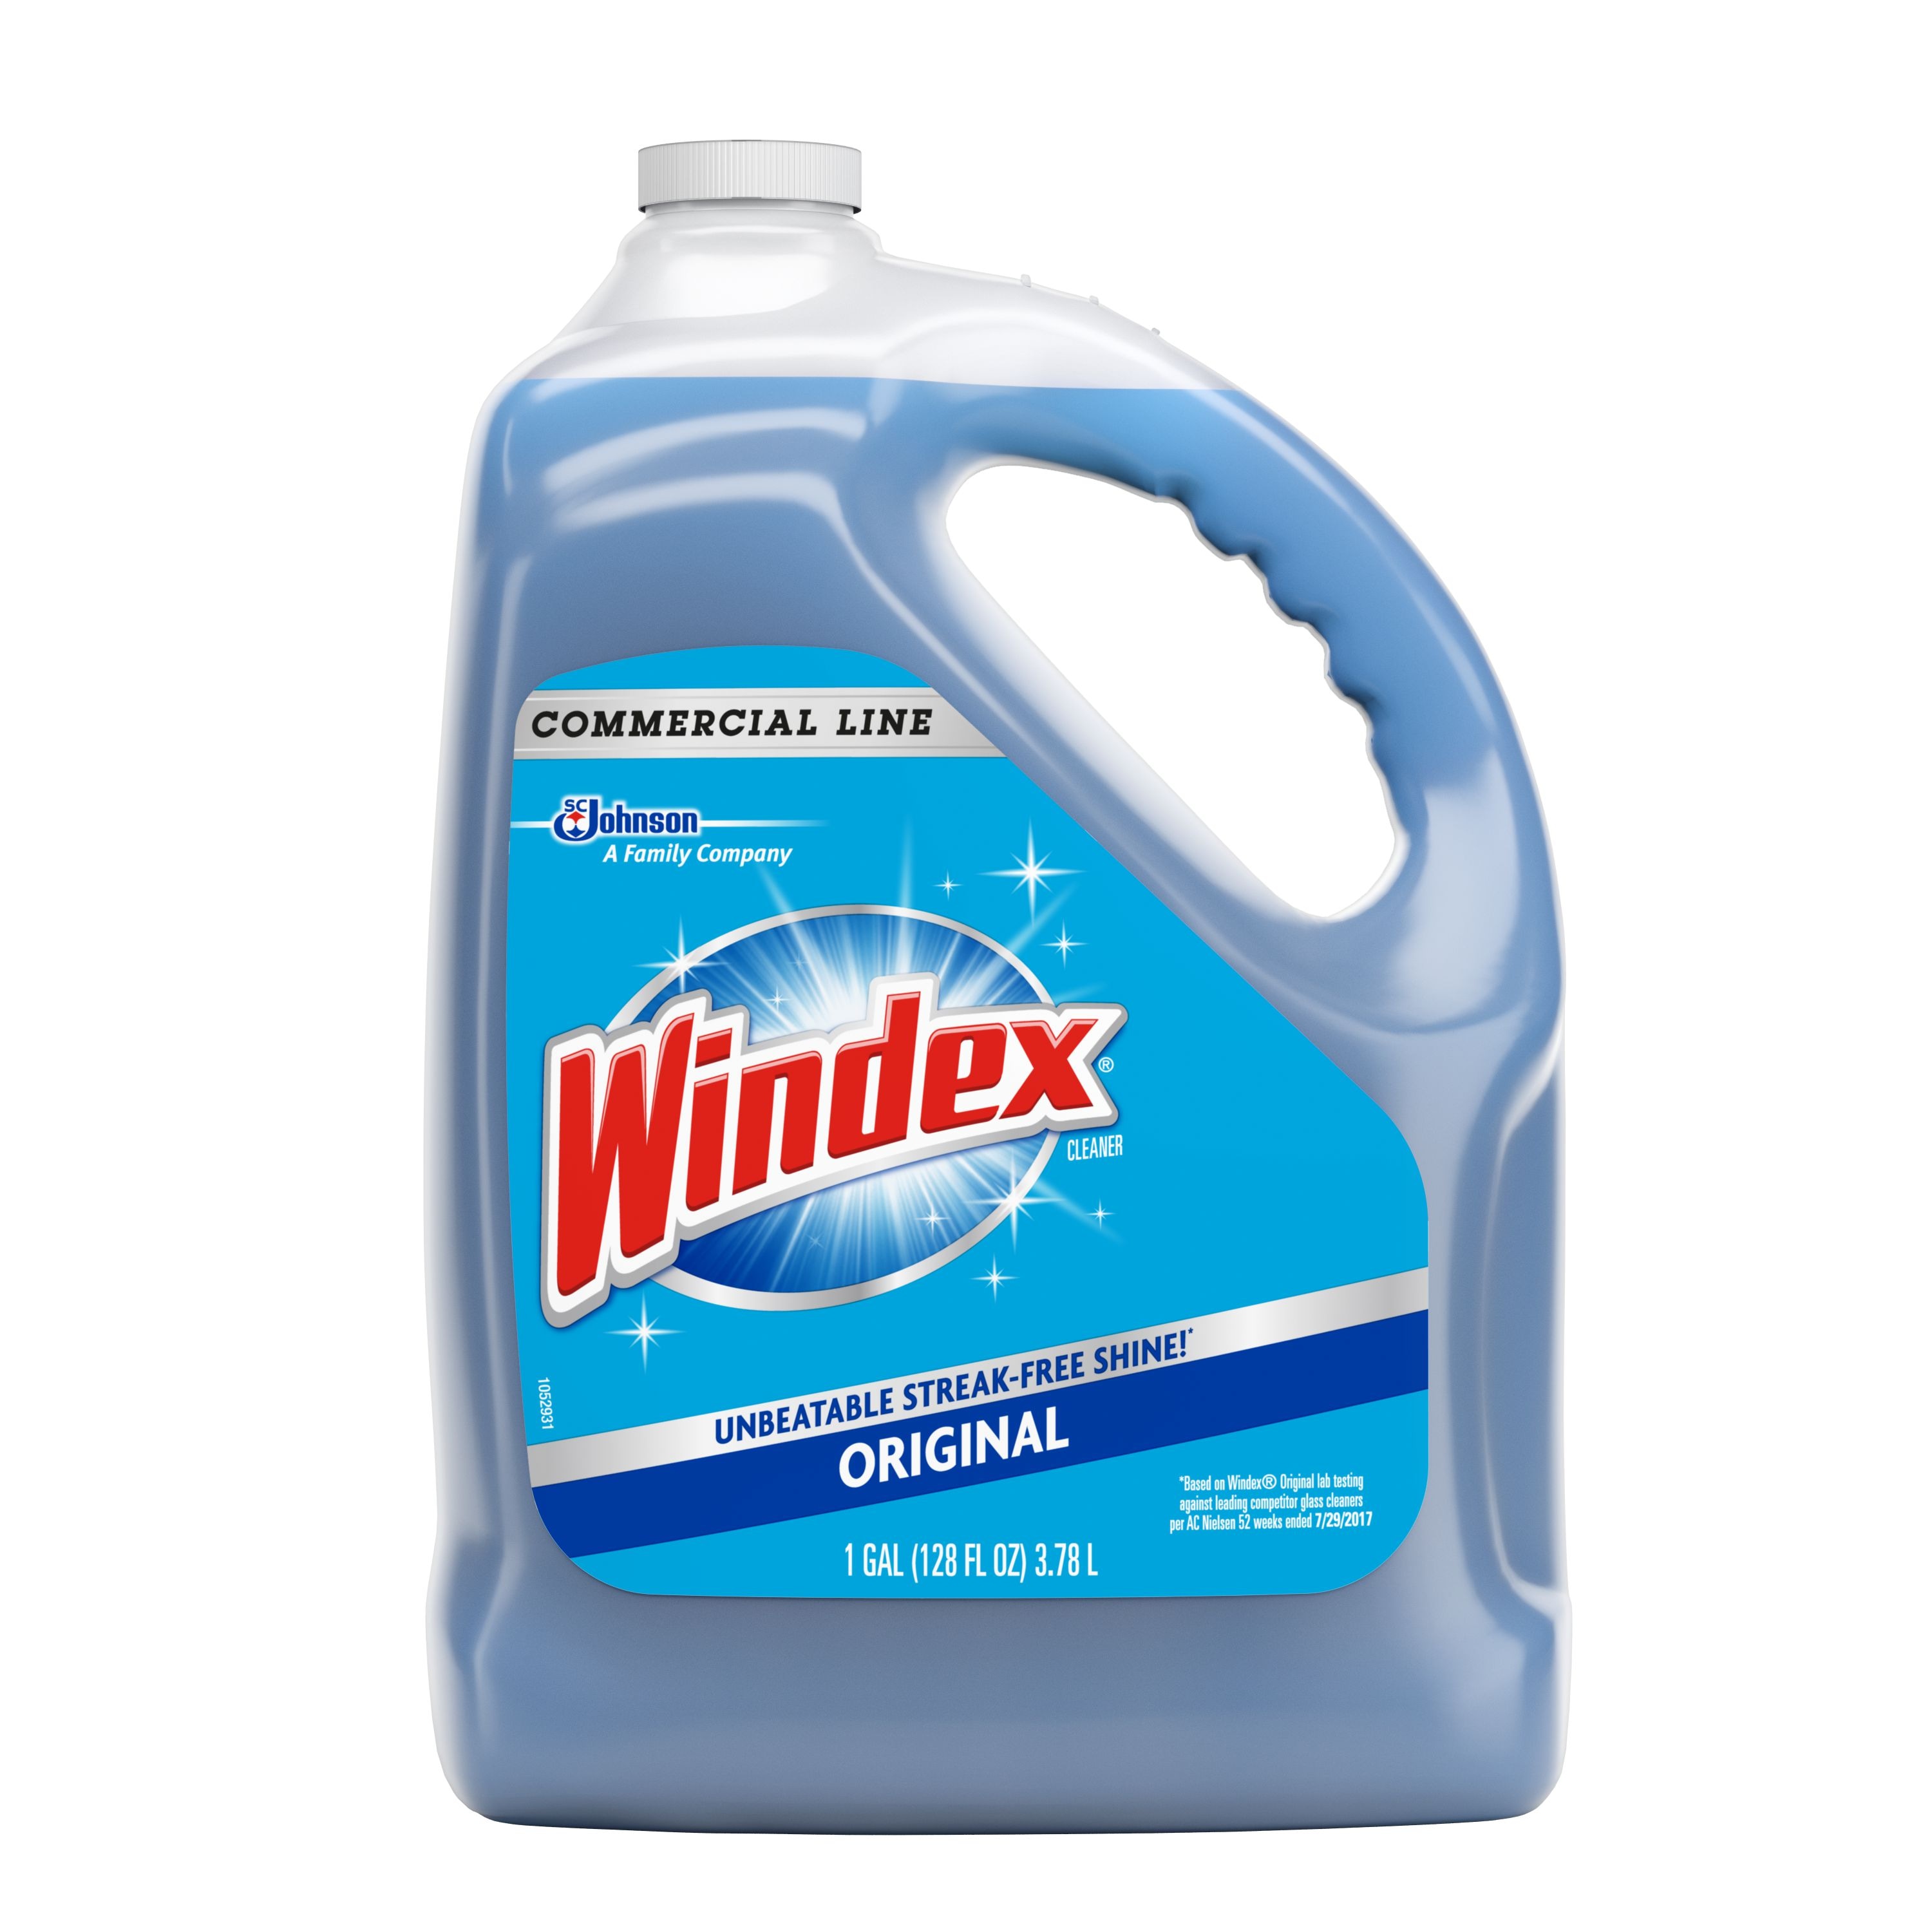 Windex Bathroom Cleaner Bundle - Glass, Shower and Bathtub, Multipurpose,  and Toilet Bowl Cleaners